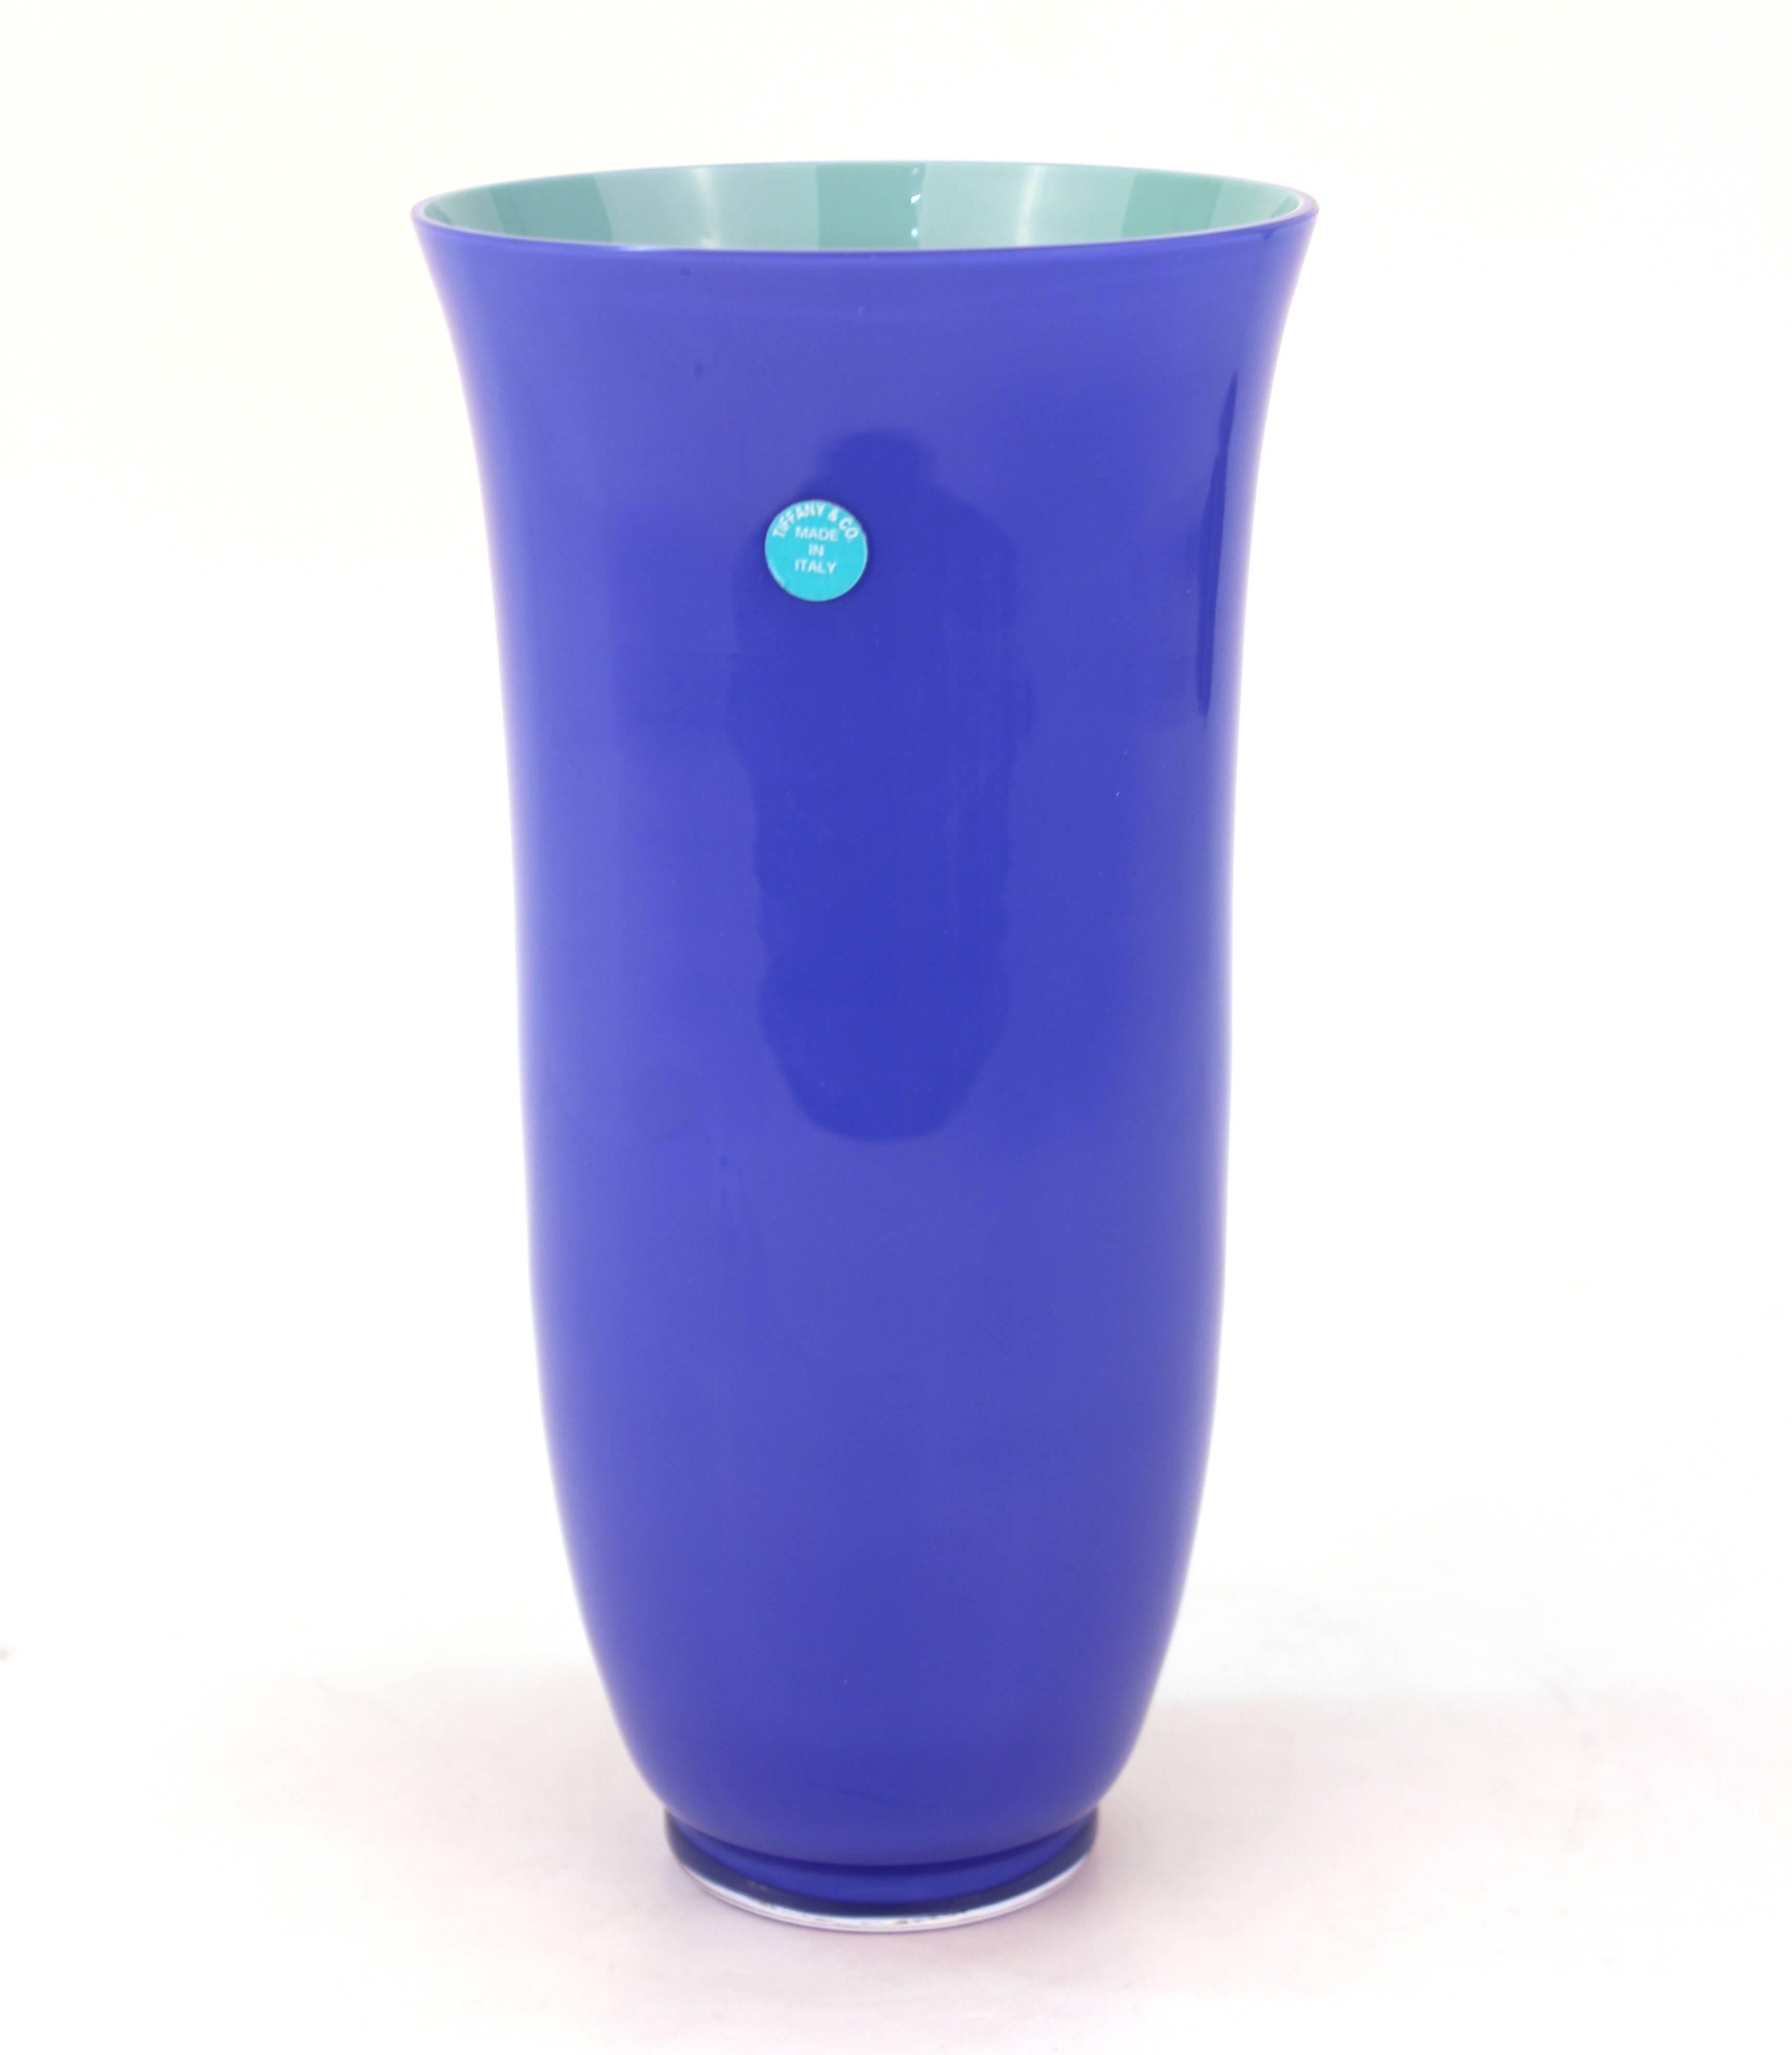 Carlo Moretti vase for Tiffany and Co. crafted in vibrant art glass. Features a violet blue exterior and aqua interior. Includes the original Tiffany & Co. label with etched signature on the bottom of the base along with [Italy]. The piece remains